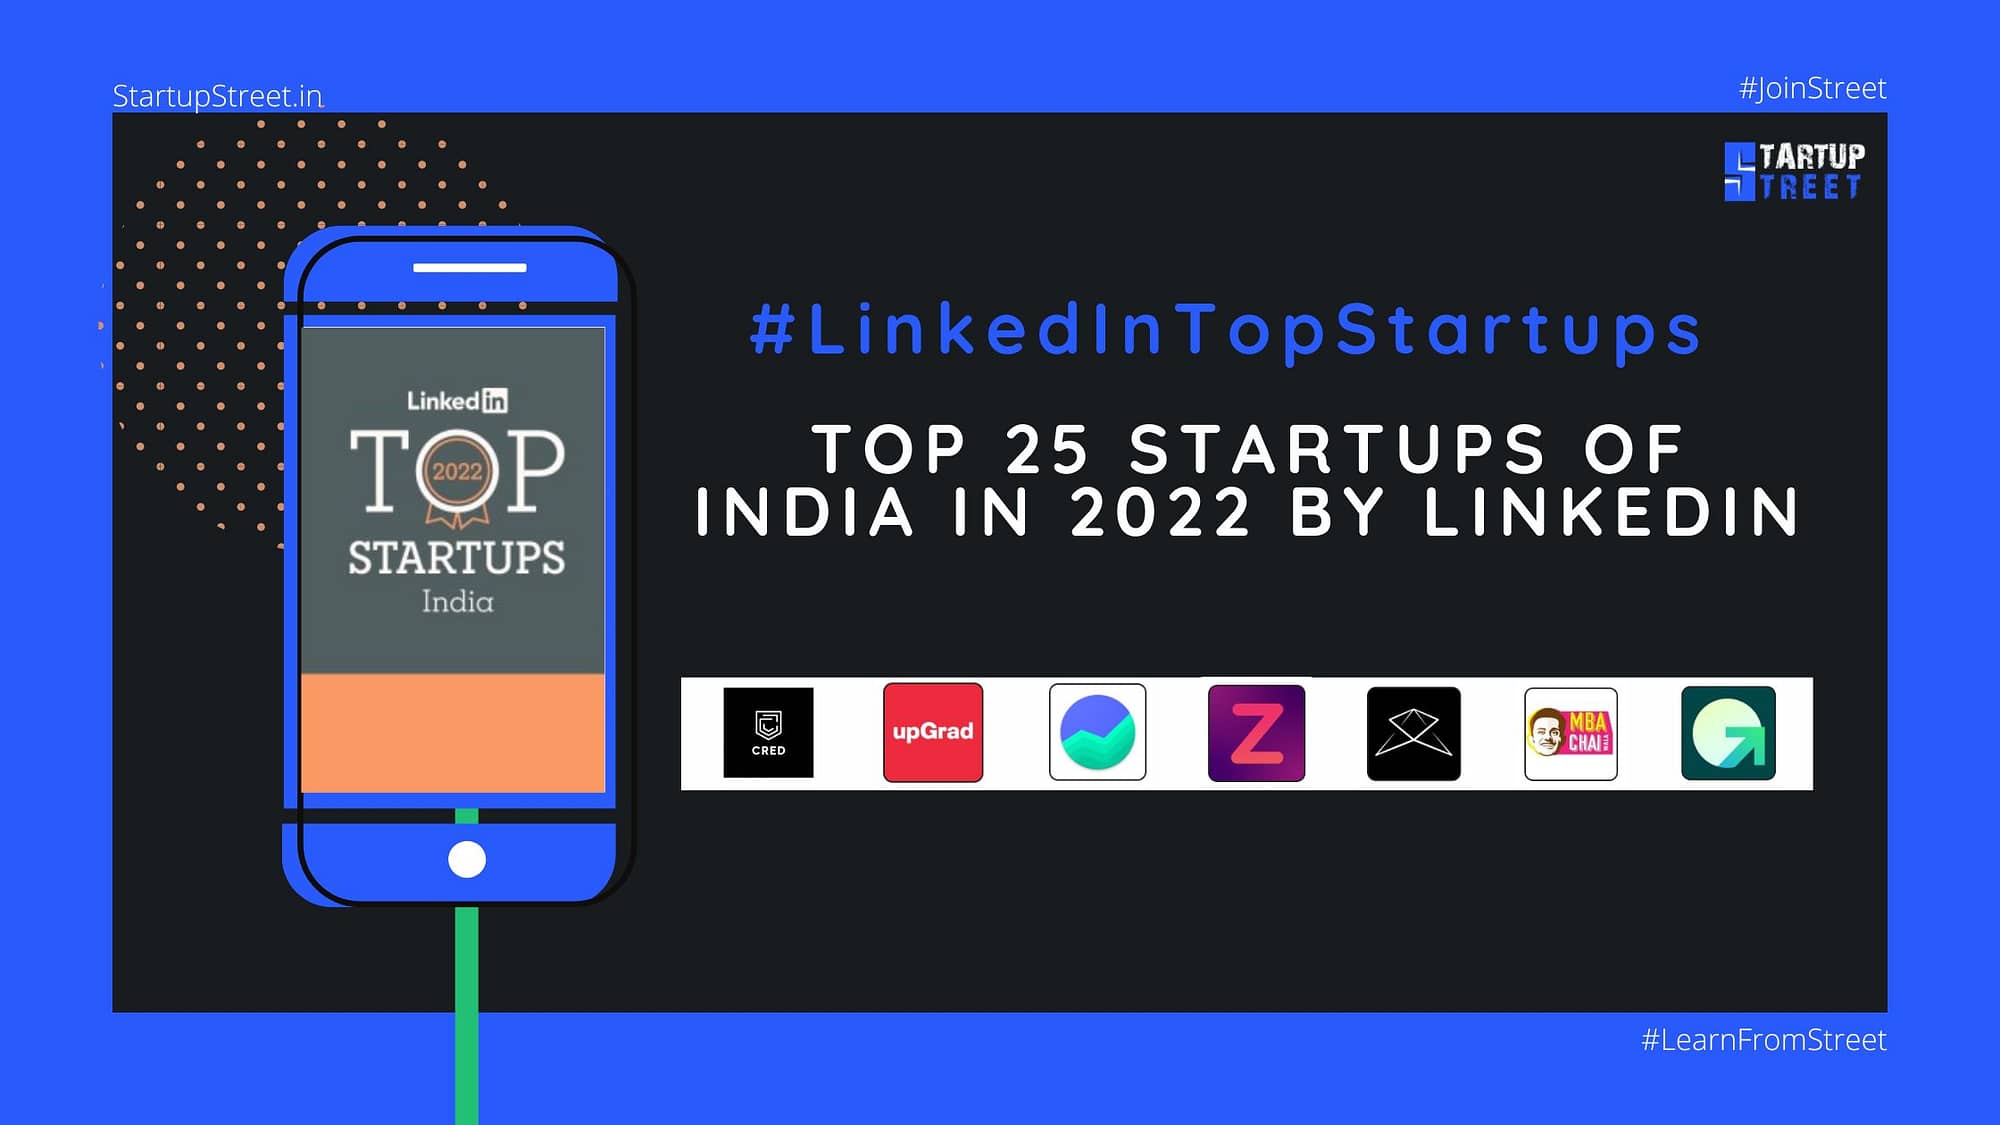 Top 25 startups of India in 2022 by LI_StartupStreet.in